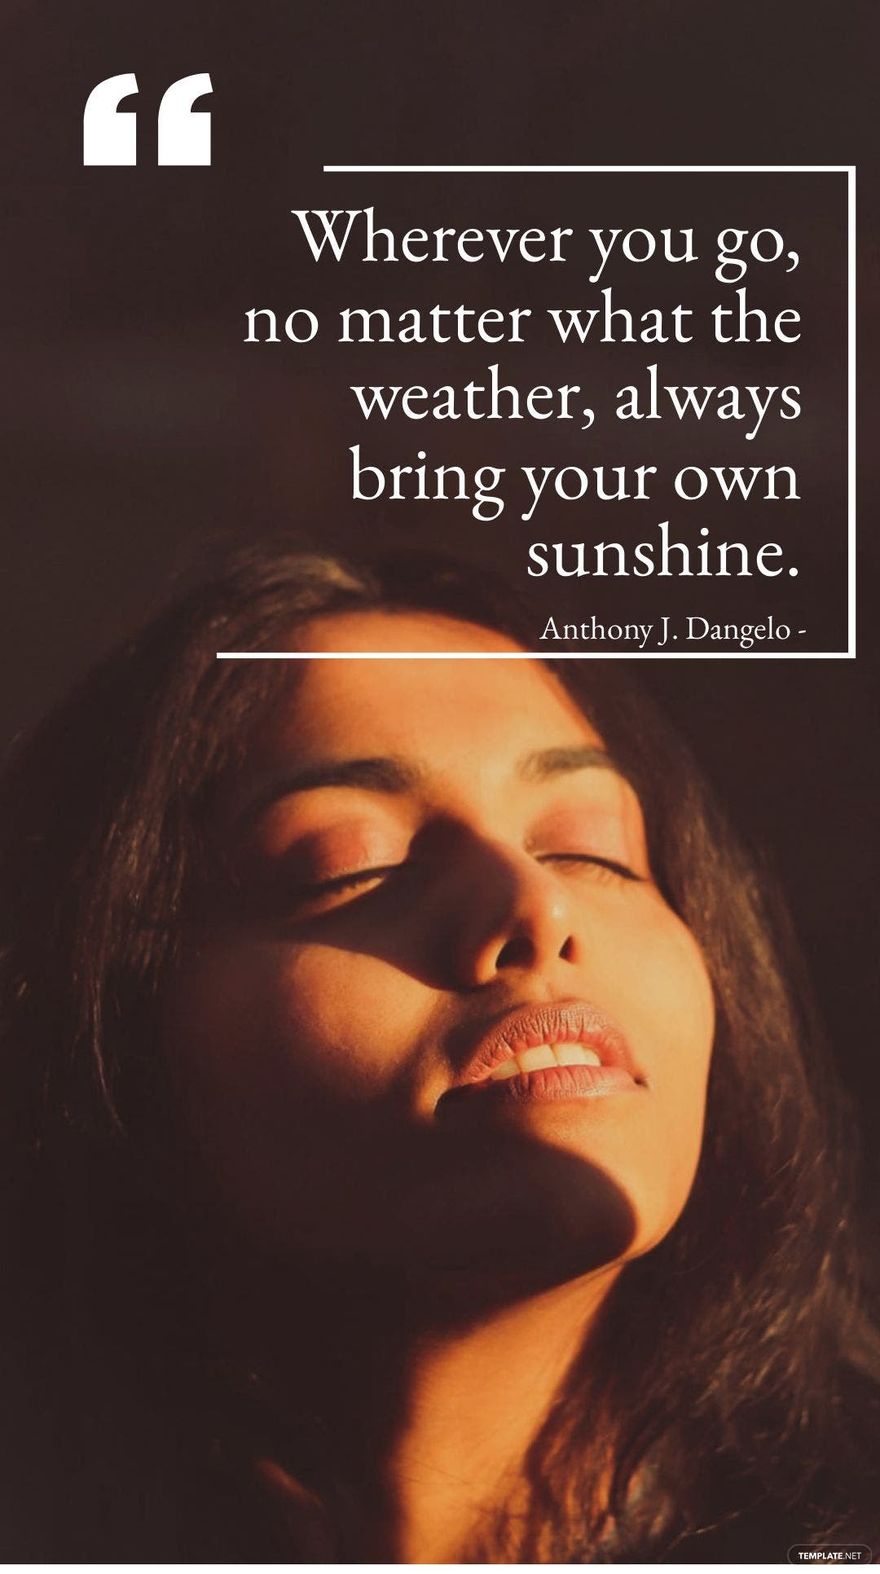 Anthony J. Dangelo - Wherever you go, no matter what the weather, always bring your own sunshine.